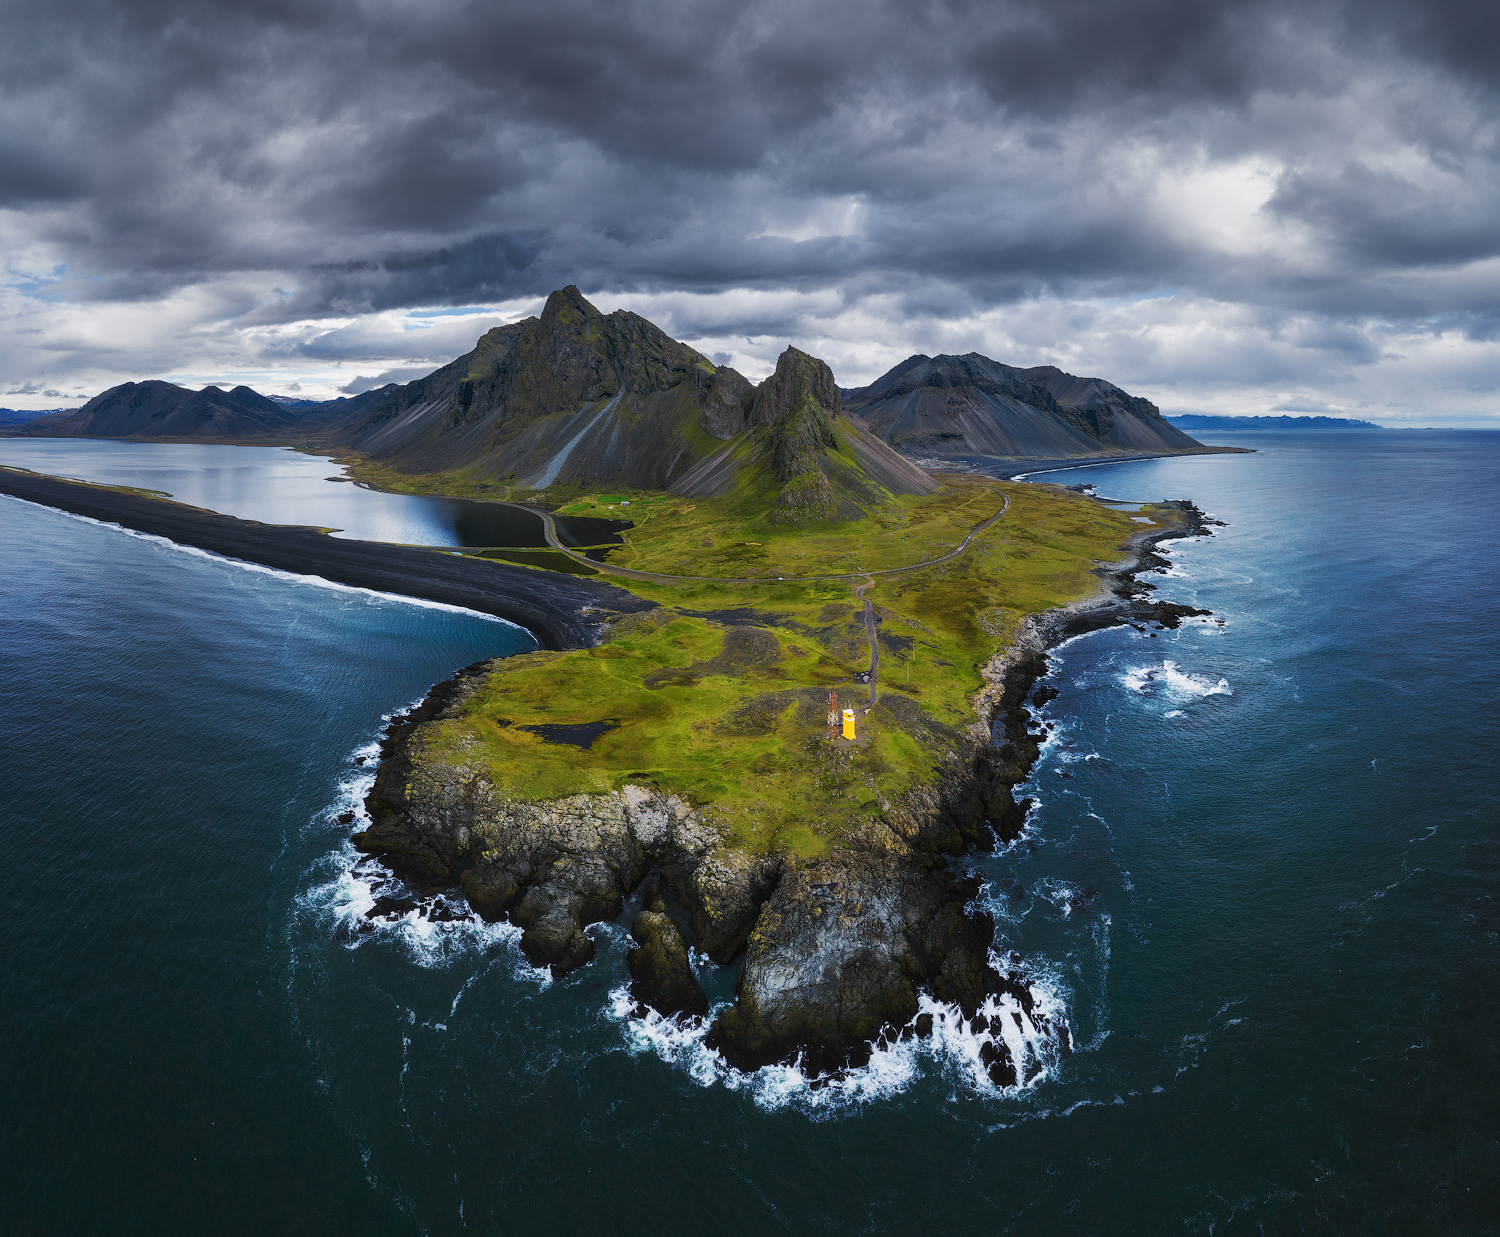 pad Enig med bro What Are the Rules For Flying a Drone in Iceland? | Iceland Photo Tours